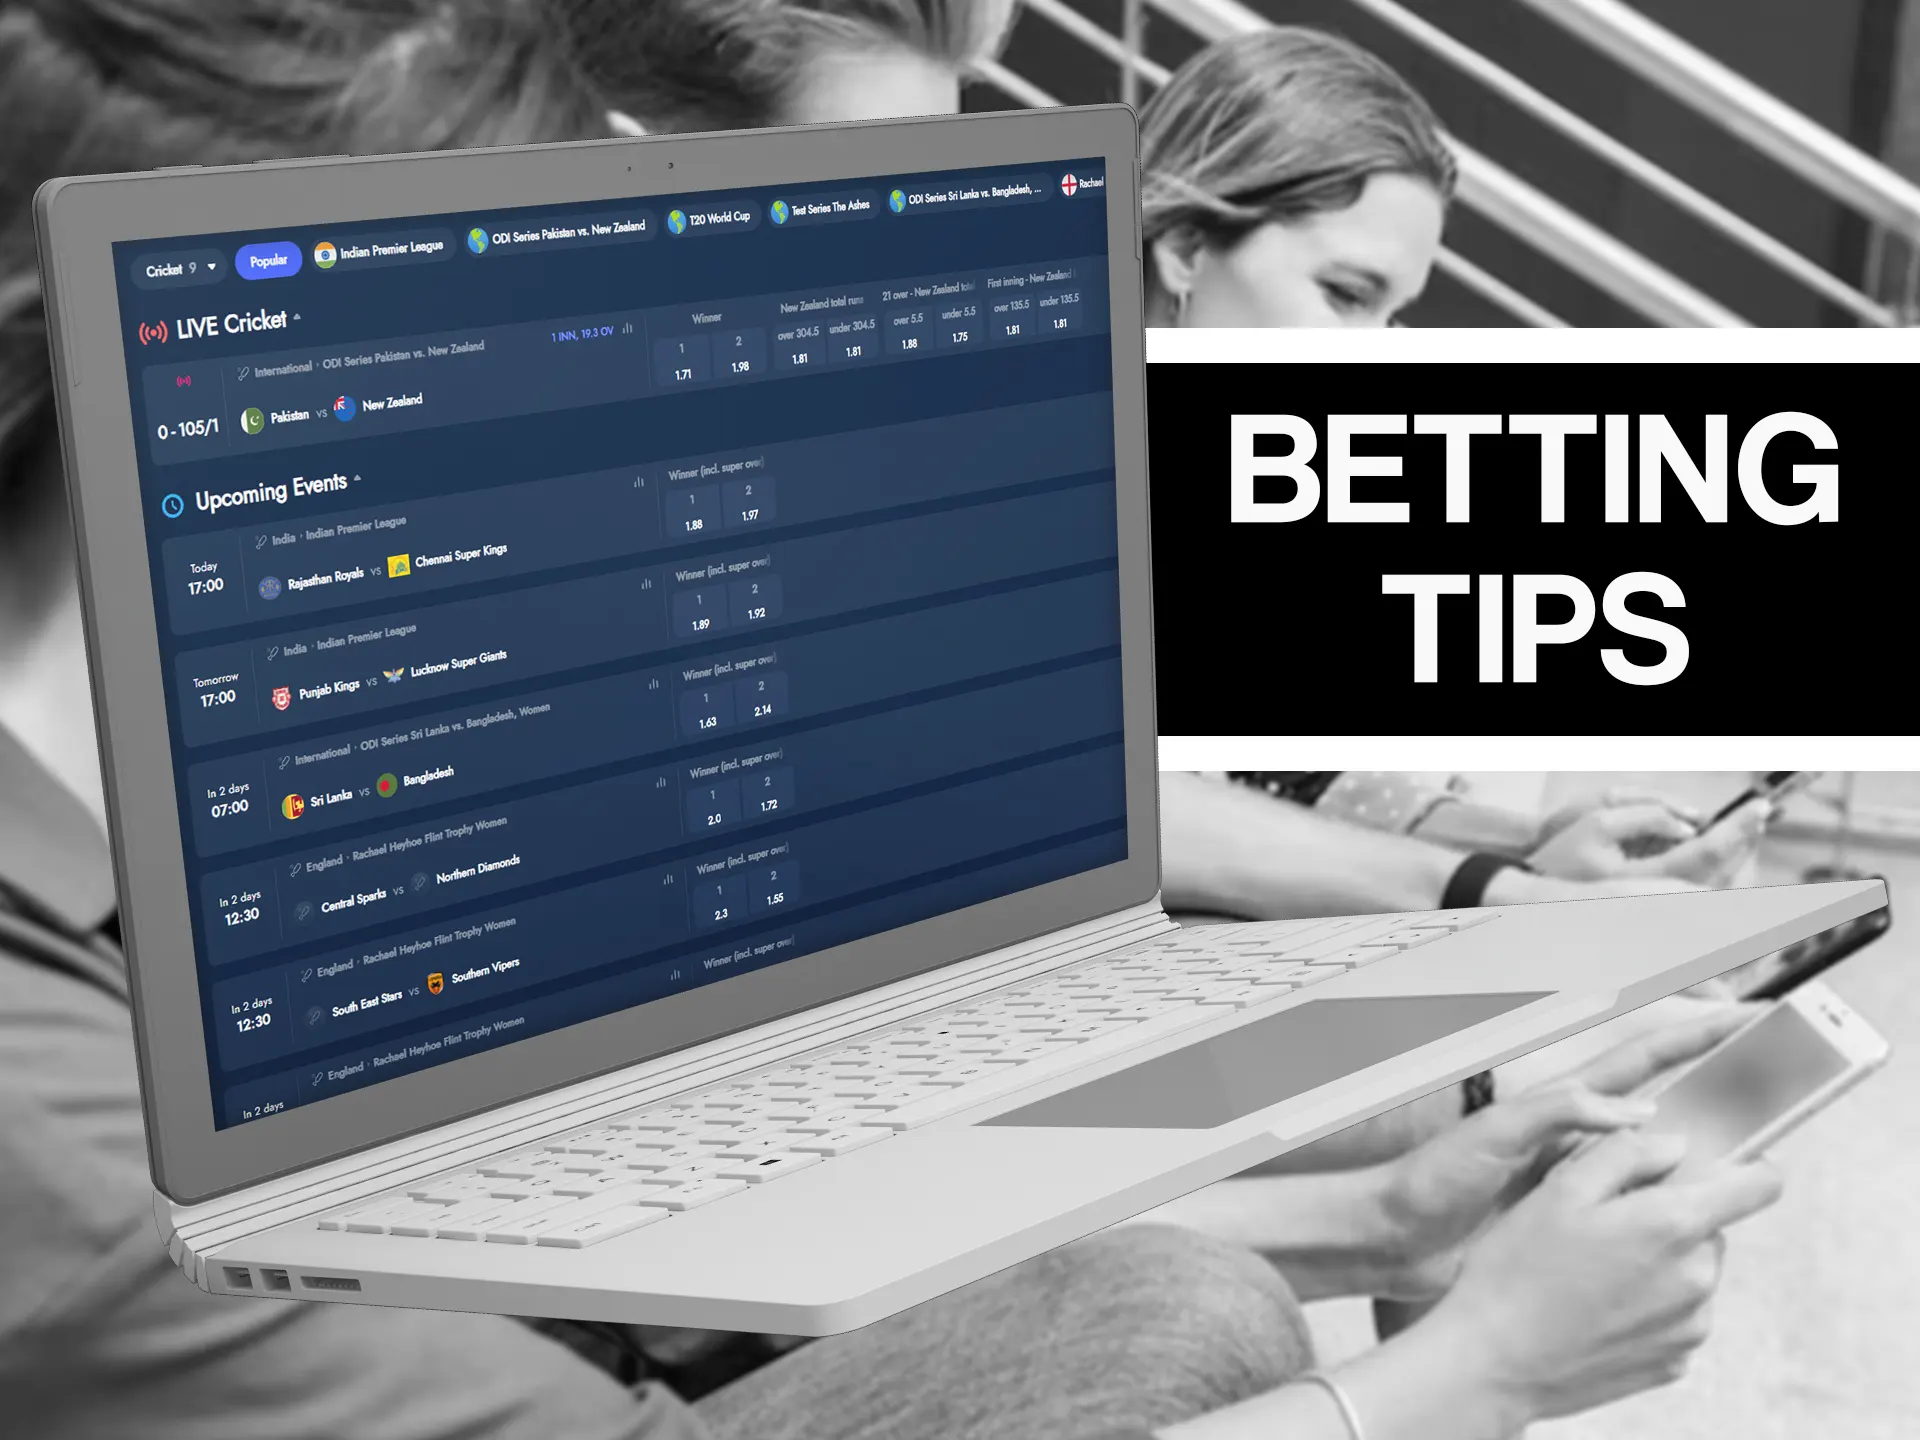 Use special betting tips before making cricket bet.